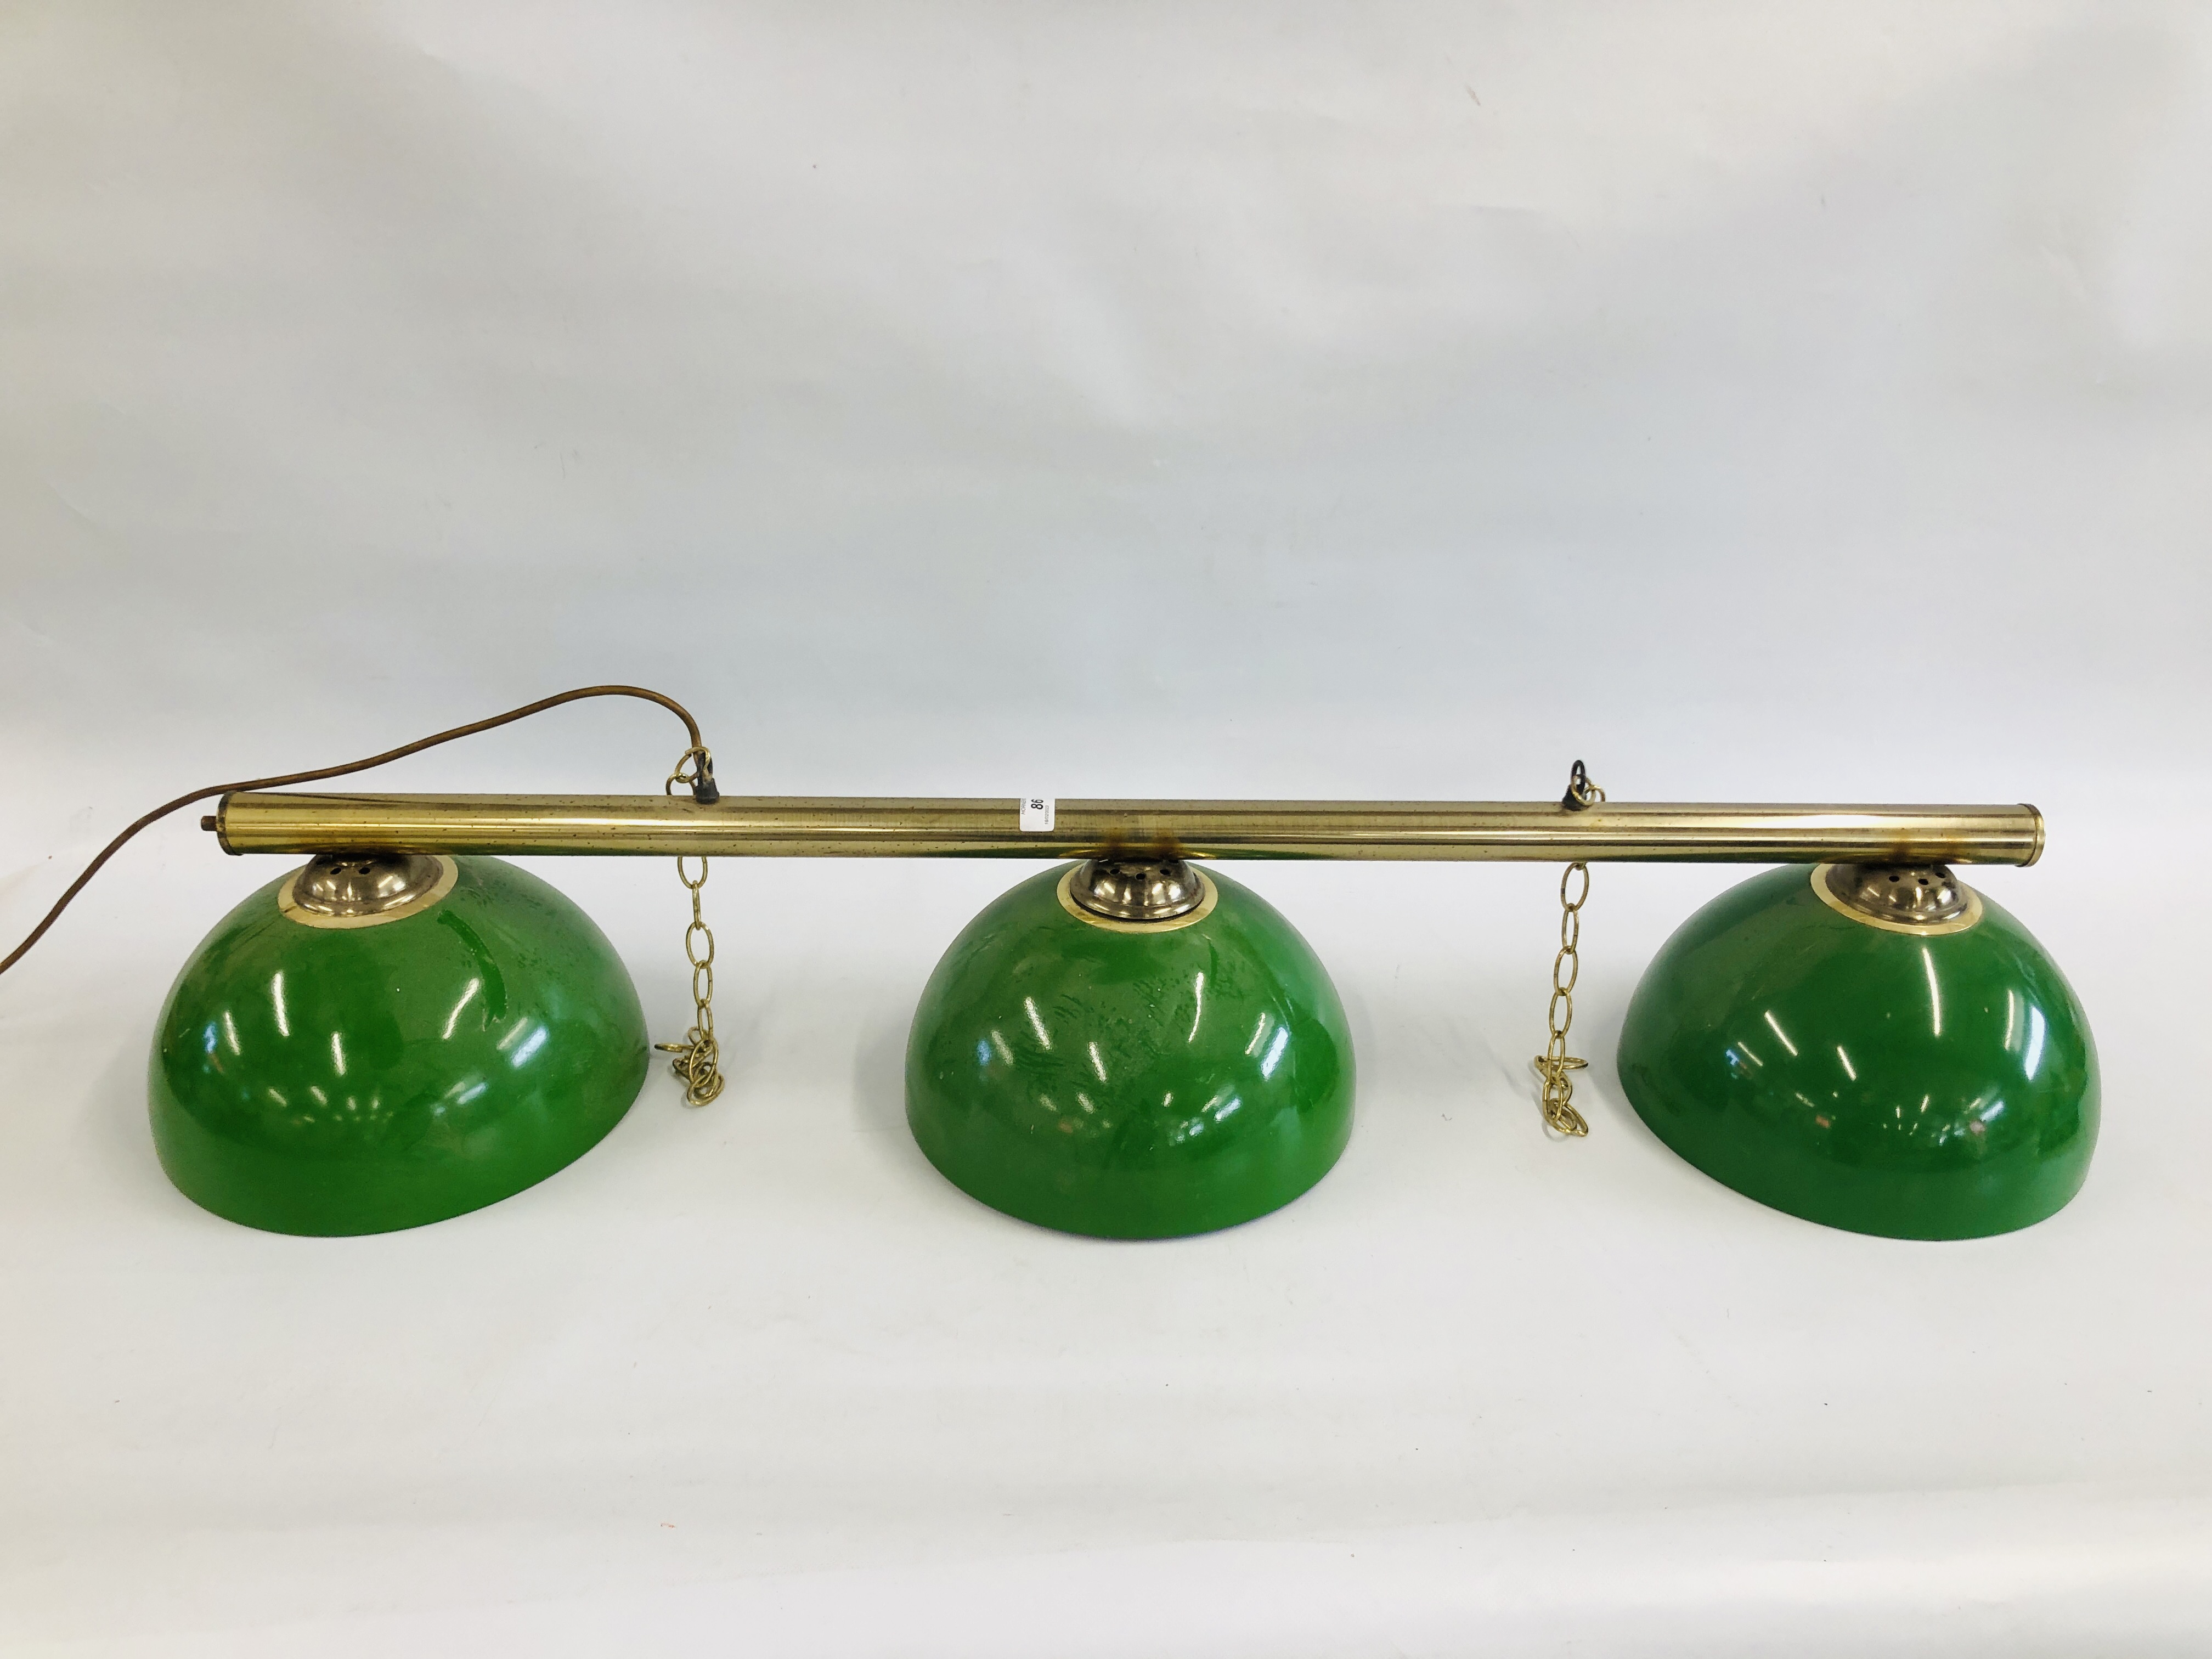 A VINTAGE STYLE CEILING SUSPENDED THREE BULB LIGHT BAR ON BRASS EFFECT TUBE AND GREEN SHADES - SOLD